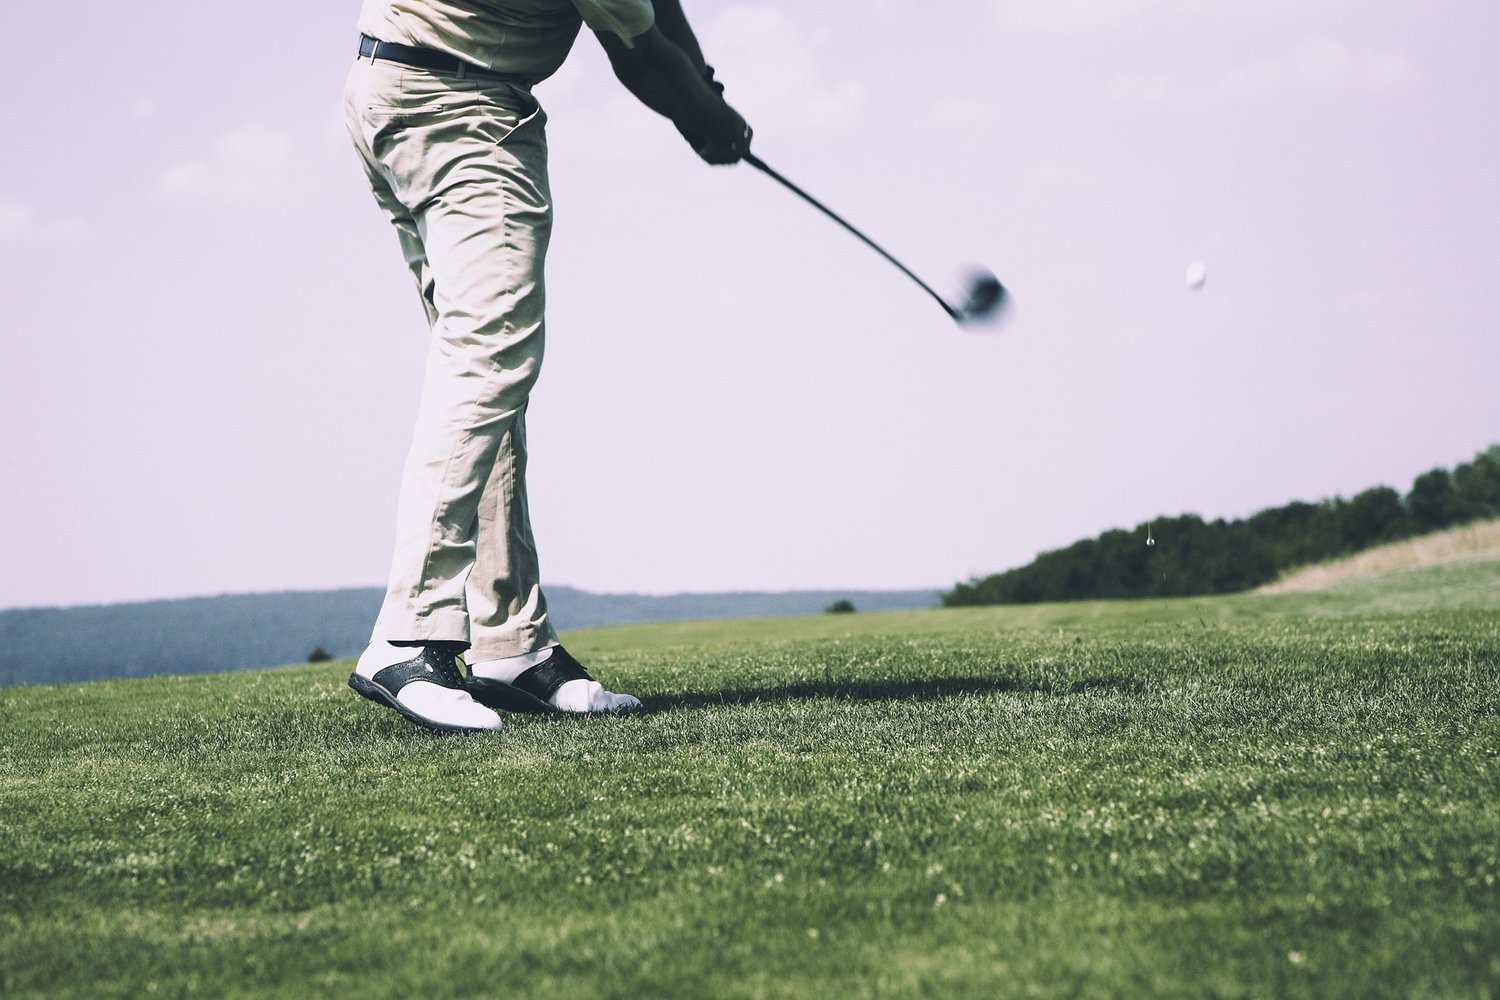 Golfers can start their seasons off for a good cause with the Daphne Knights of Columbus Golf Classic at Quail Creek Golf Course Saturday, April 22. For more information, call Richard Caudill at 251-229-7608.